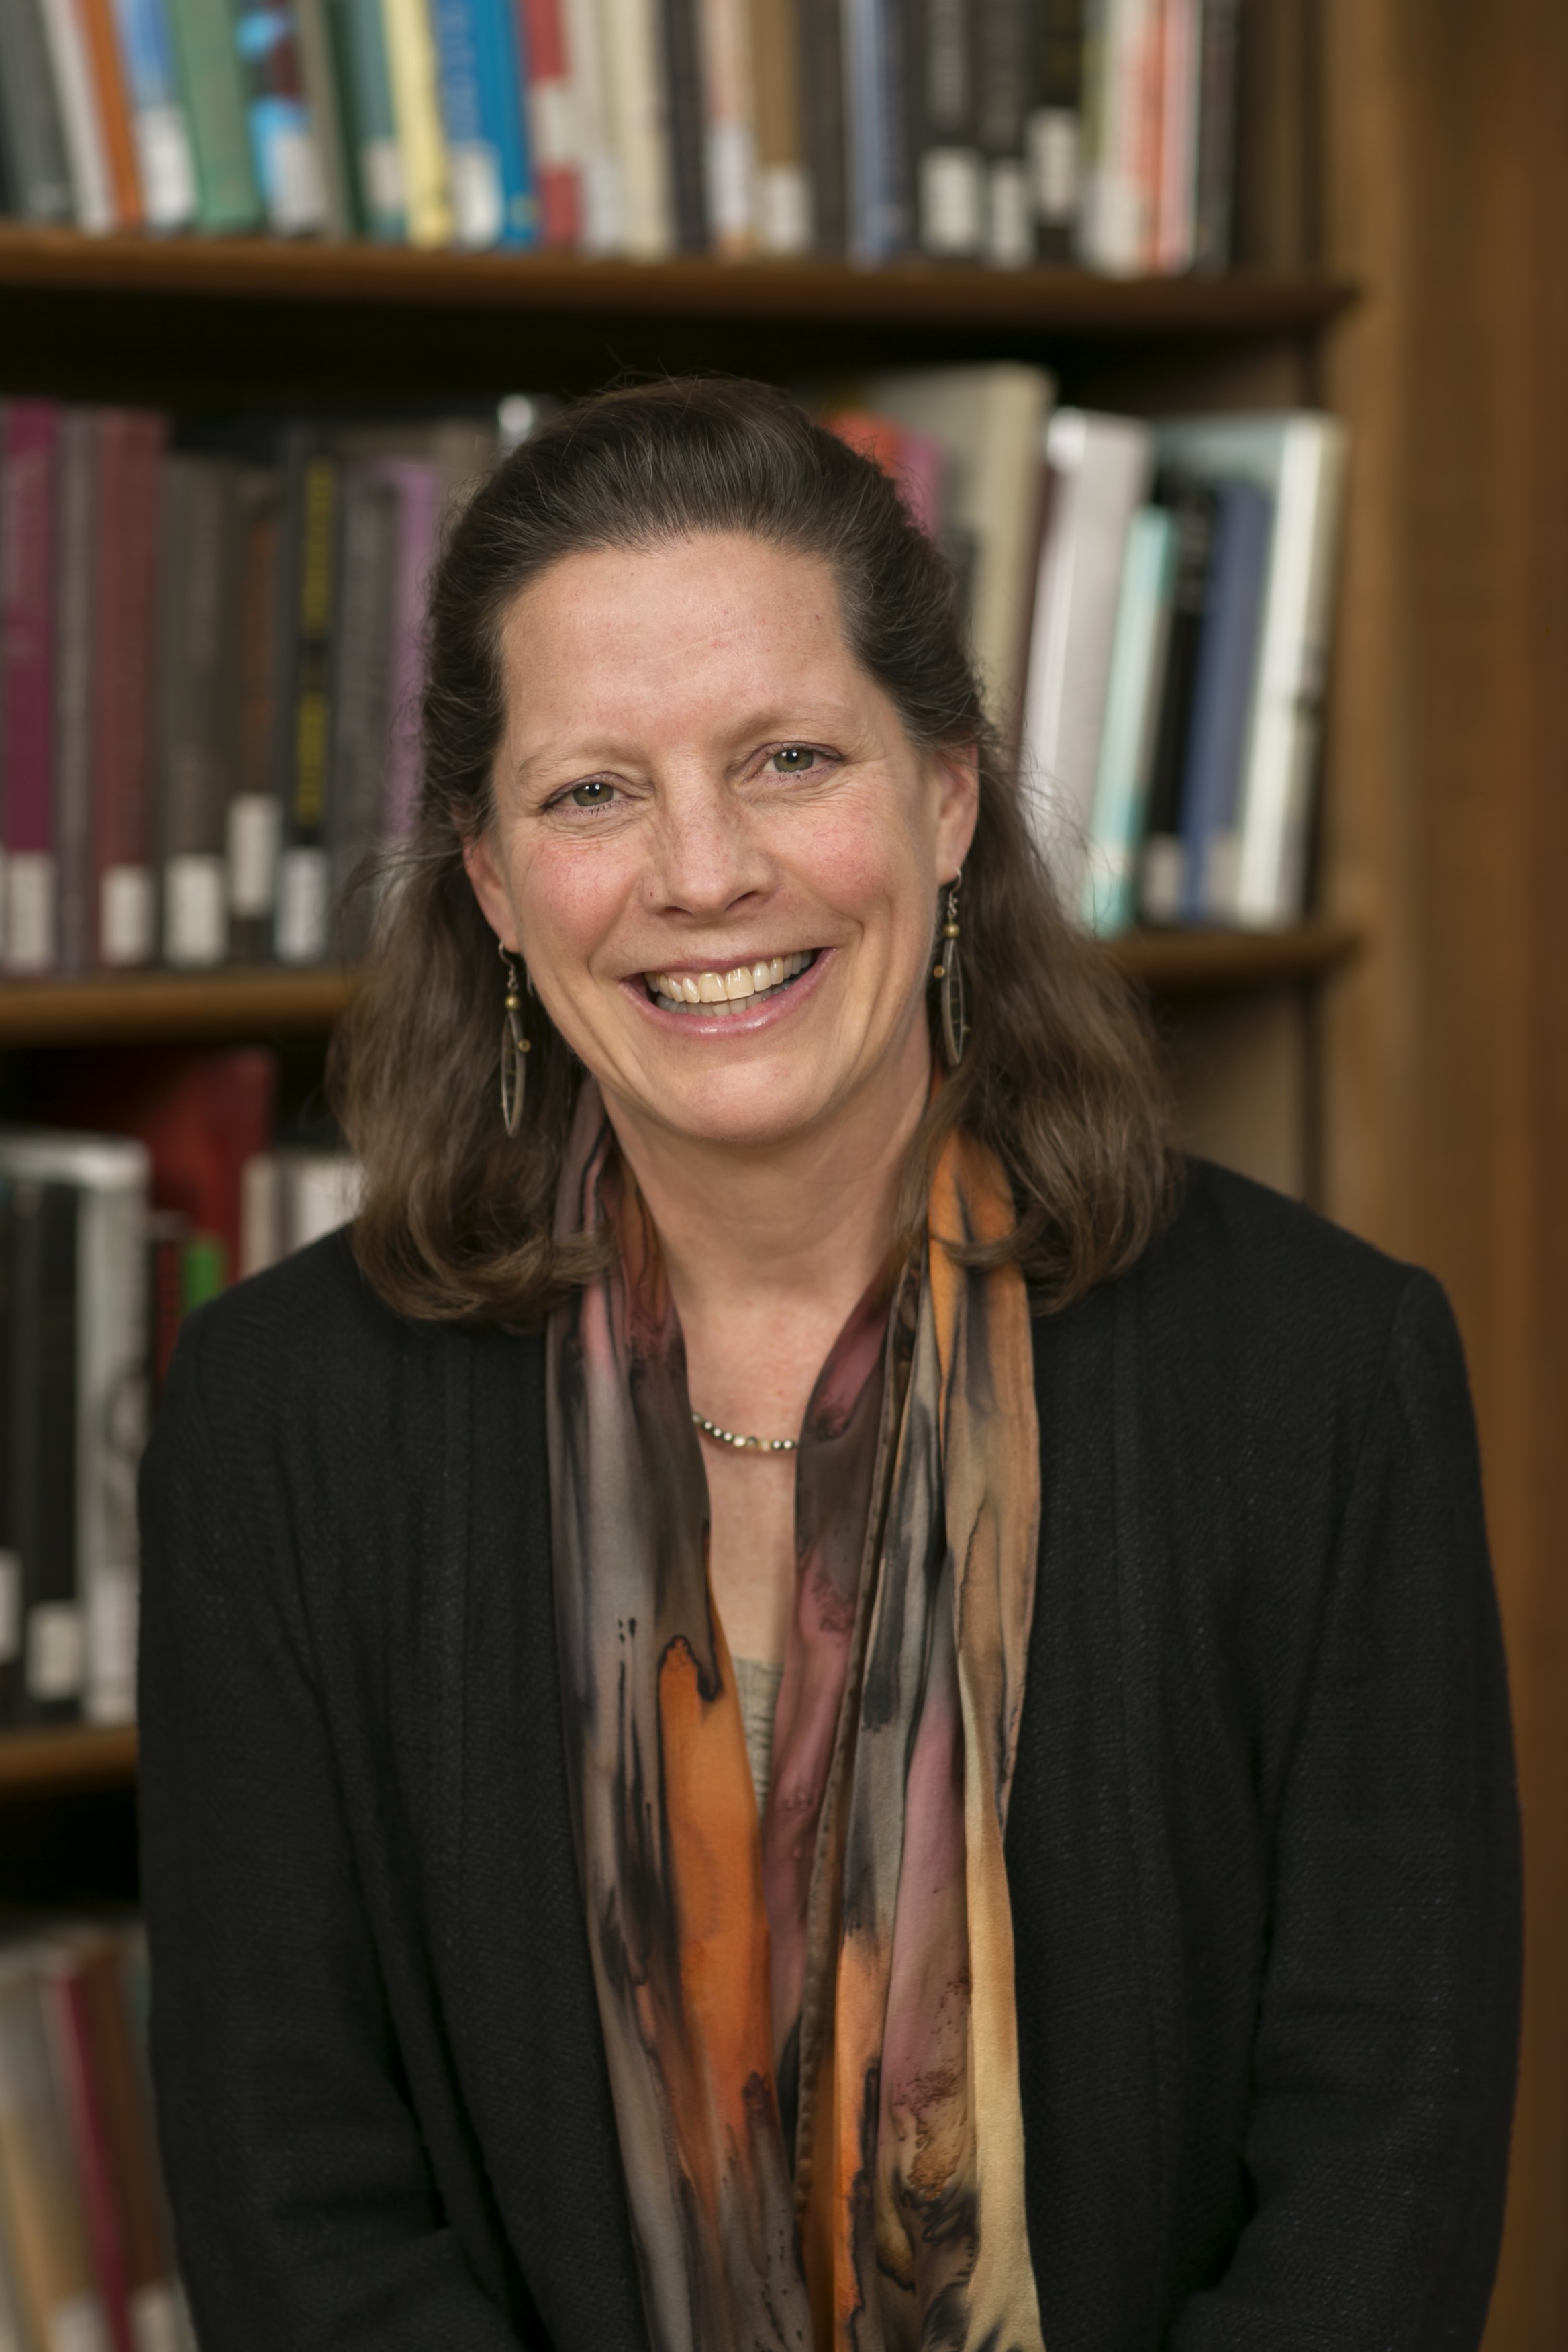 Alison Cook-Sather